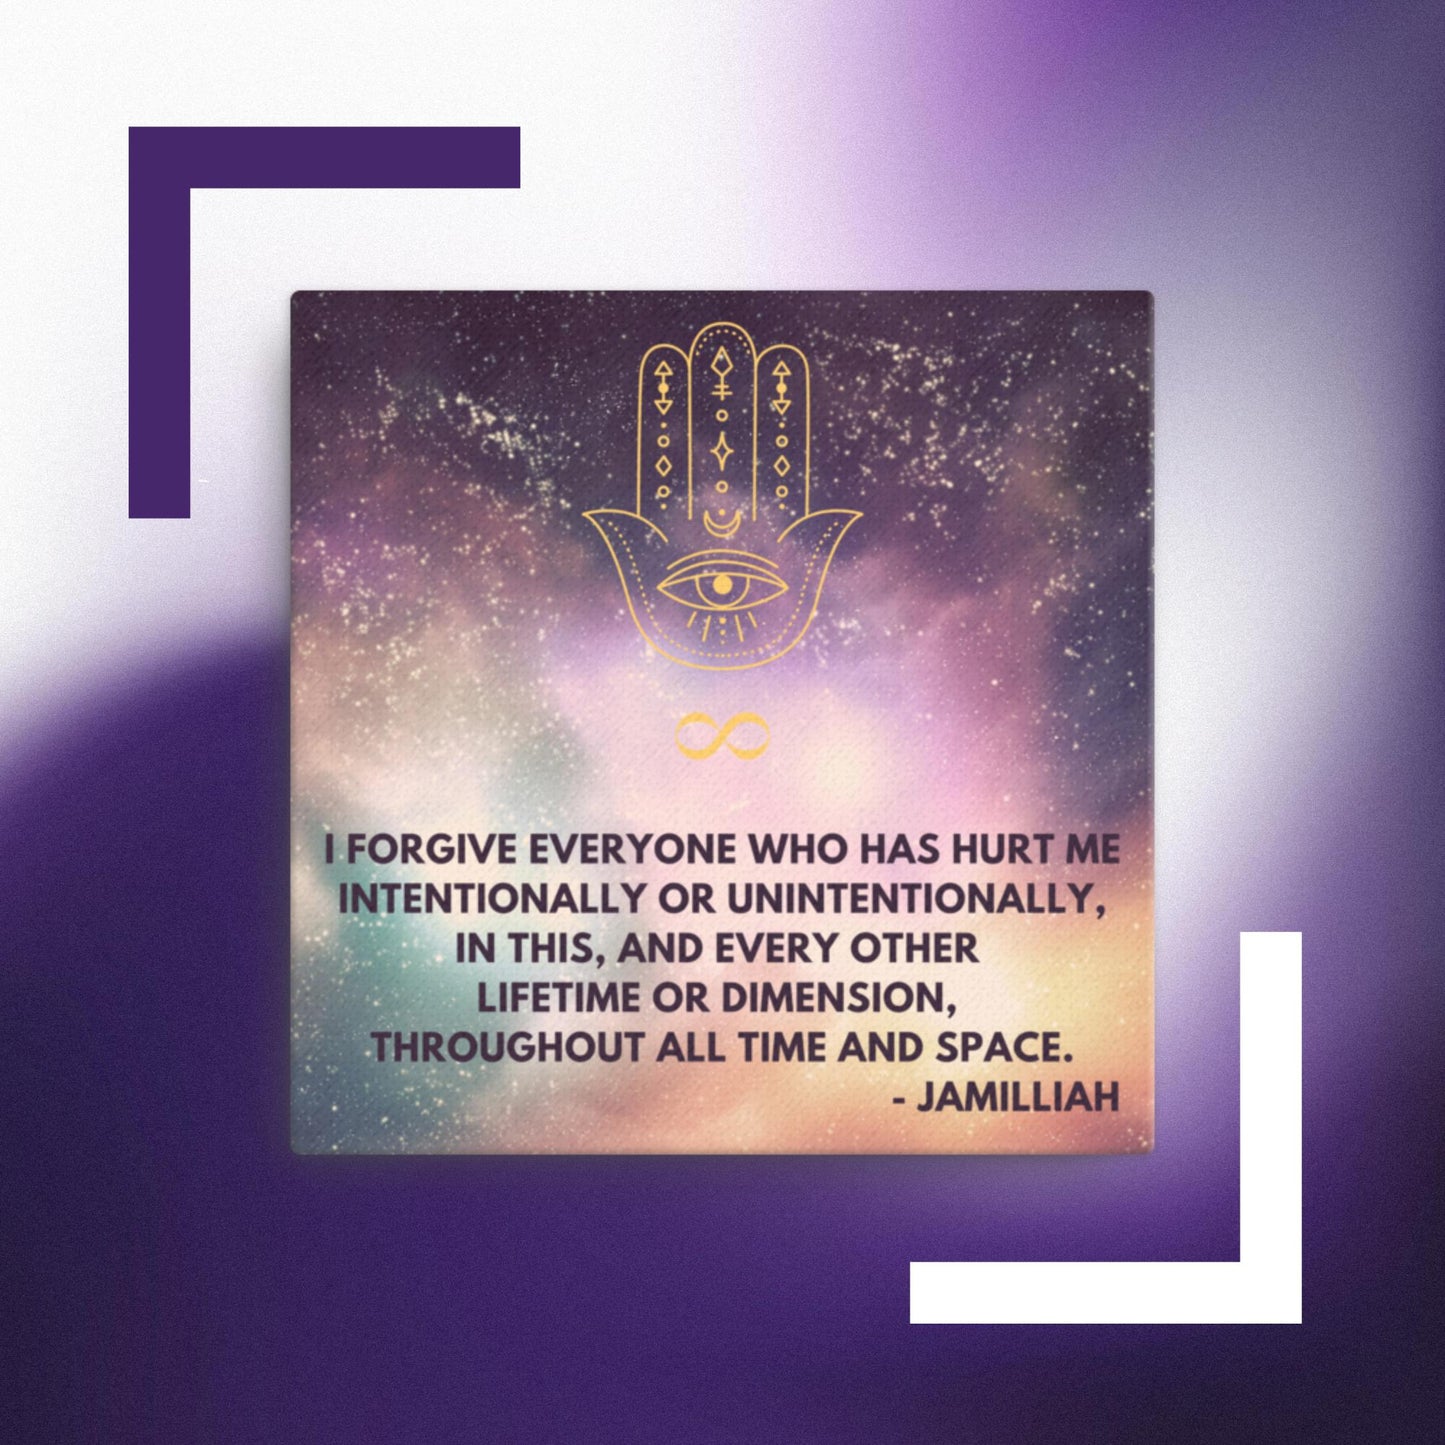  12x12 inch, fade resistant, semi-gloss, textured canvas print wall art. Purple/green/yellow space/universe/cosmos design with spiritual hamsa hand/infinity symbol/sign brand logo image, and original wise quote mantra/saying/tagline/motto/slogan. "I Forgive Everyone Who Has Hurt Me Intentionally Or Unintentionally, In This, And Every Other Lifetime Or Dimension, Throughout All Time And Space. - Jamilliah." Shown with purple and white background. JAMILLIAH'S WISDOM IS TIMELESS SHOP - wisdomistimeless.com.